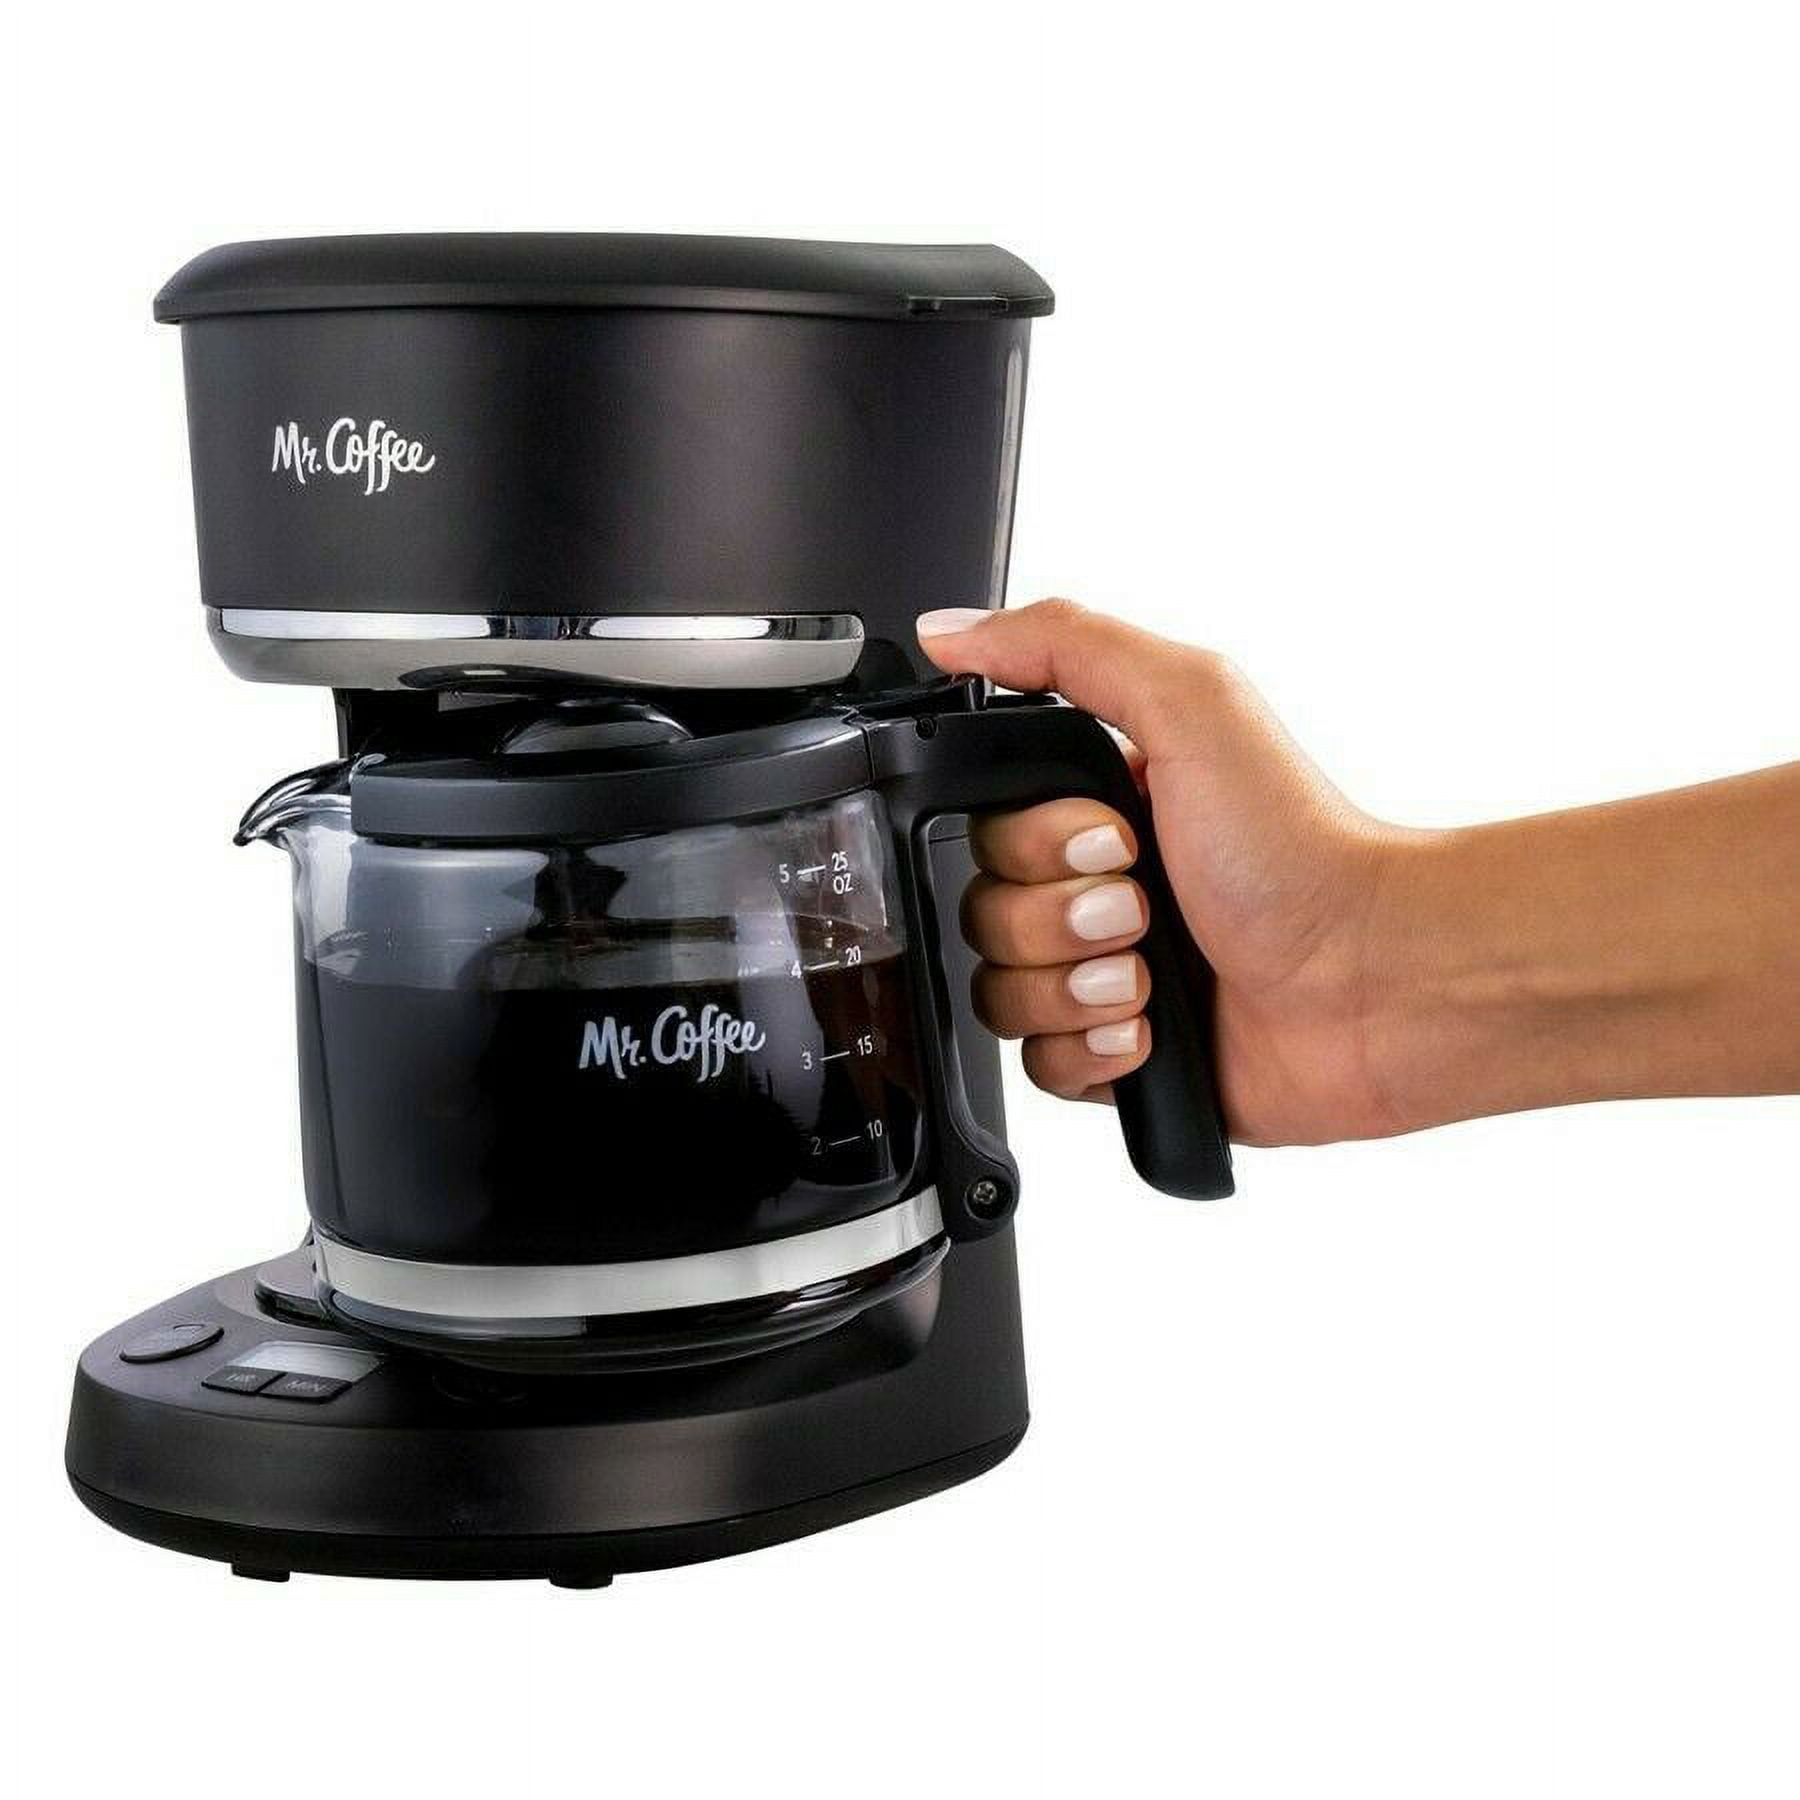 Mr. Coffee 5-Cup Switch Black Coffee Maker - Foley Hardware